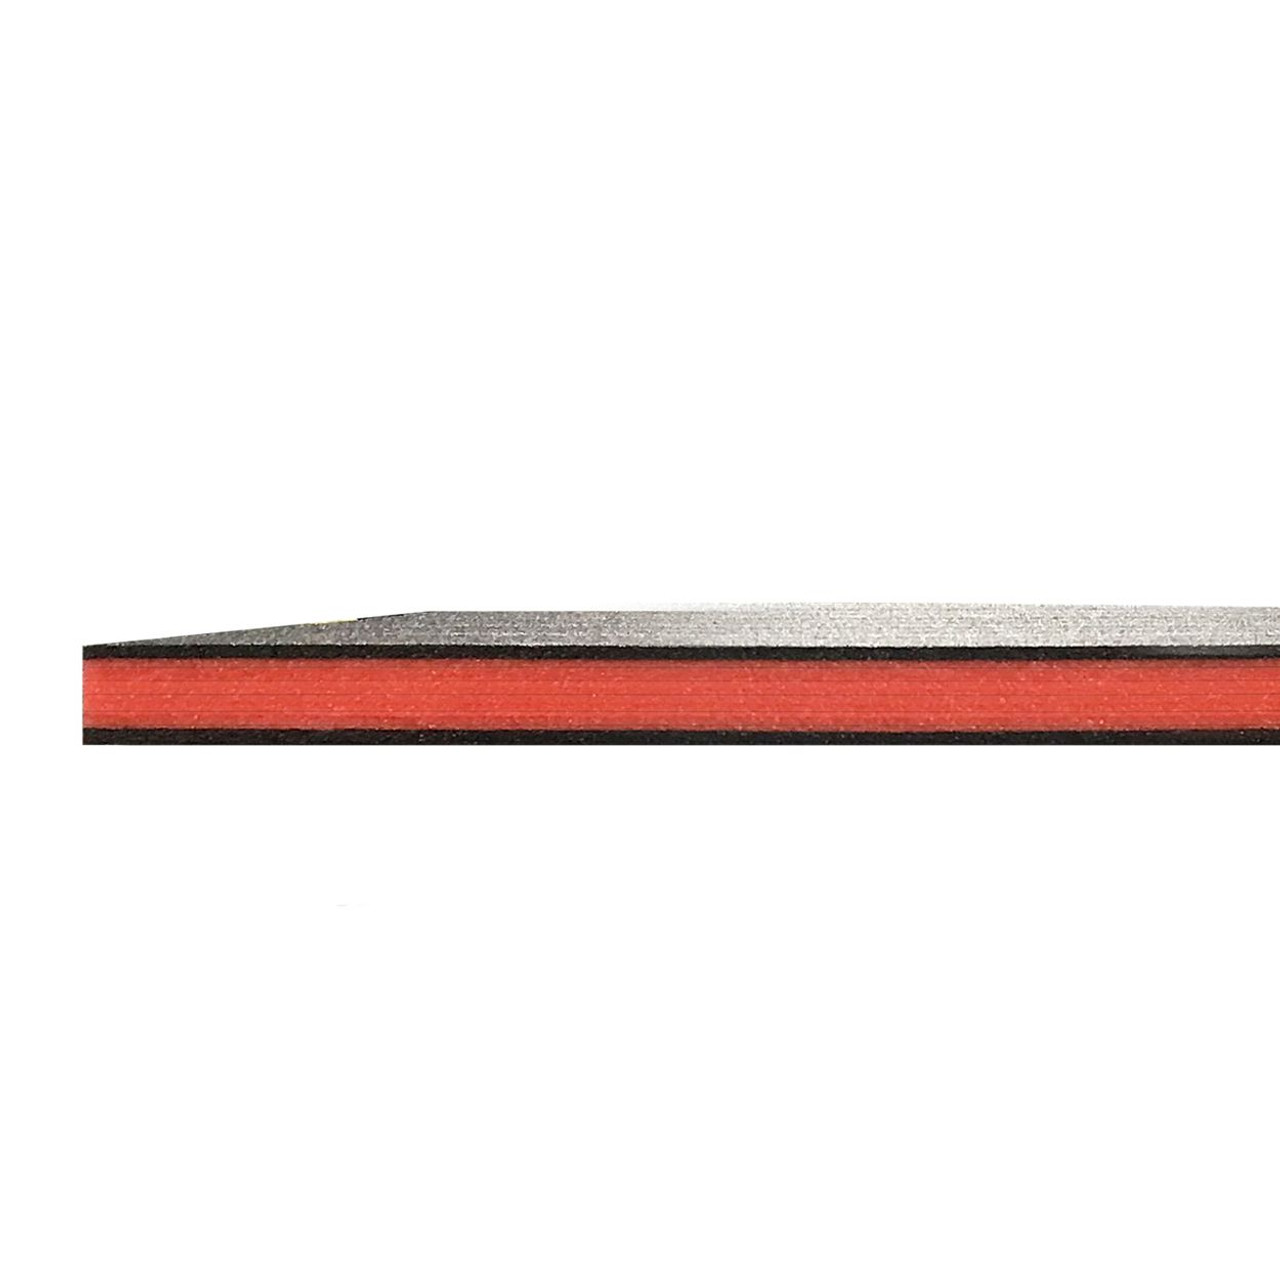 FastCap KAIZEN FOAM 30MM R/B - 1-1/8 Thick, Black and Red, 2' x 4